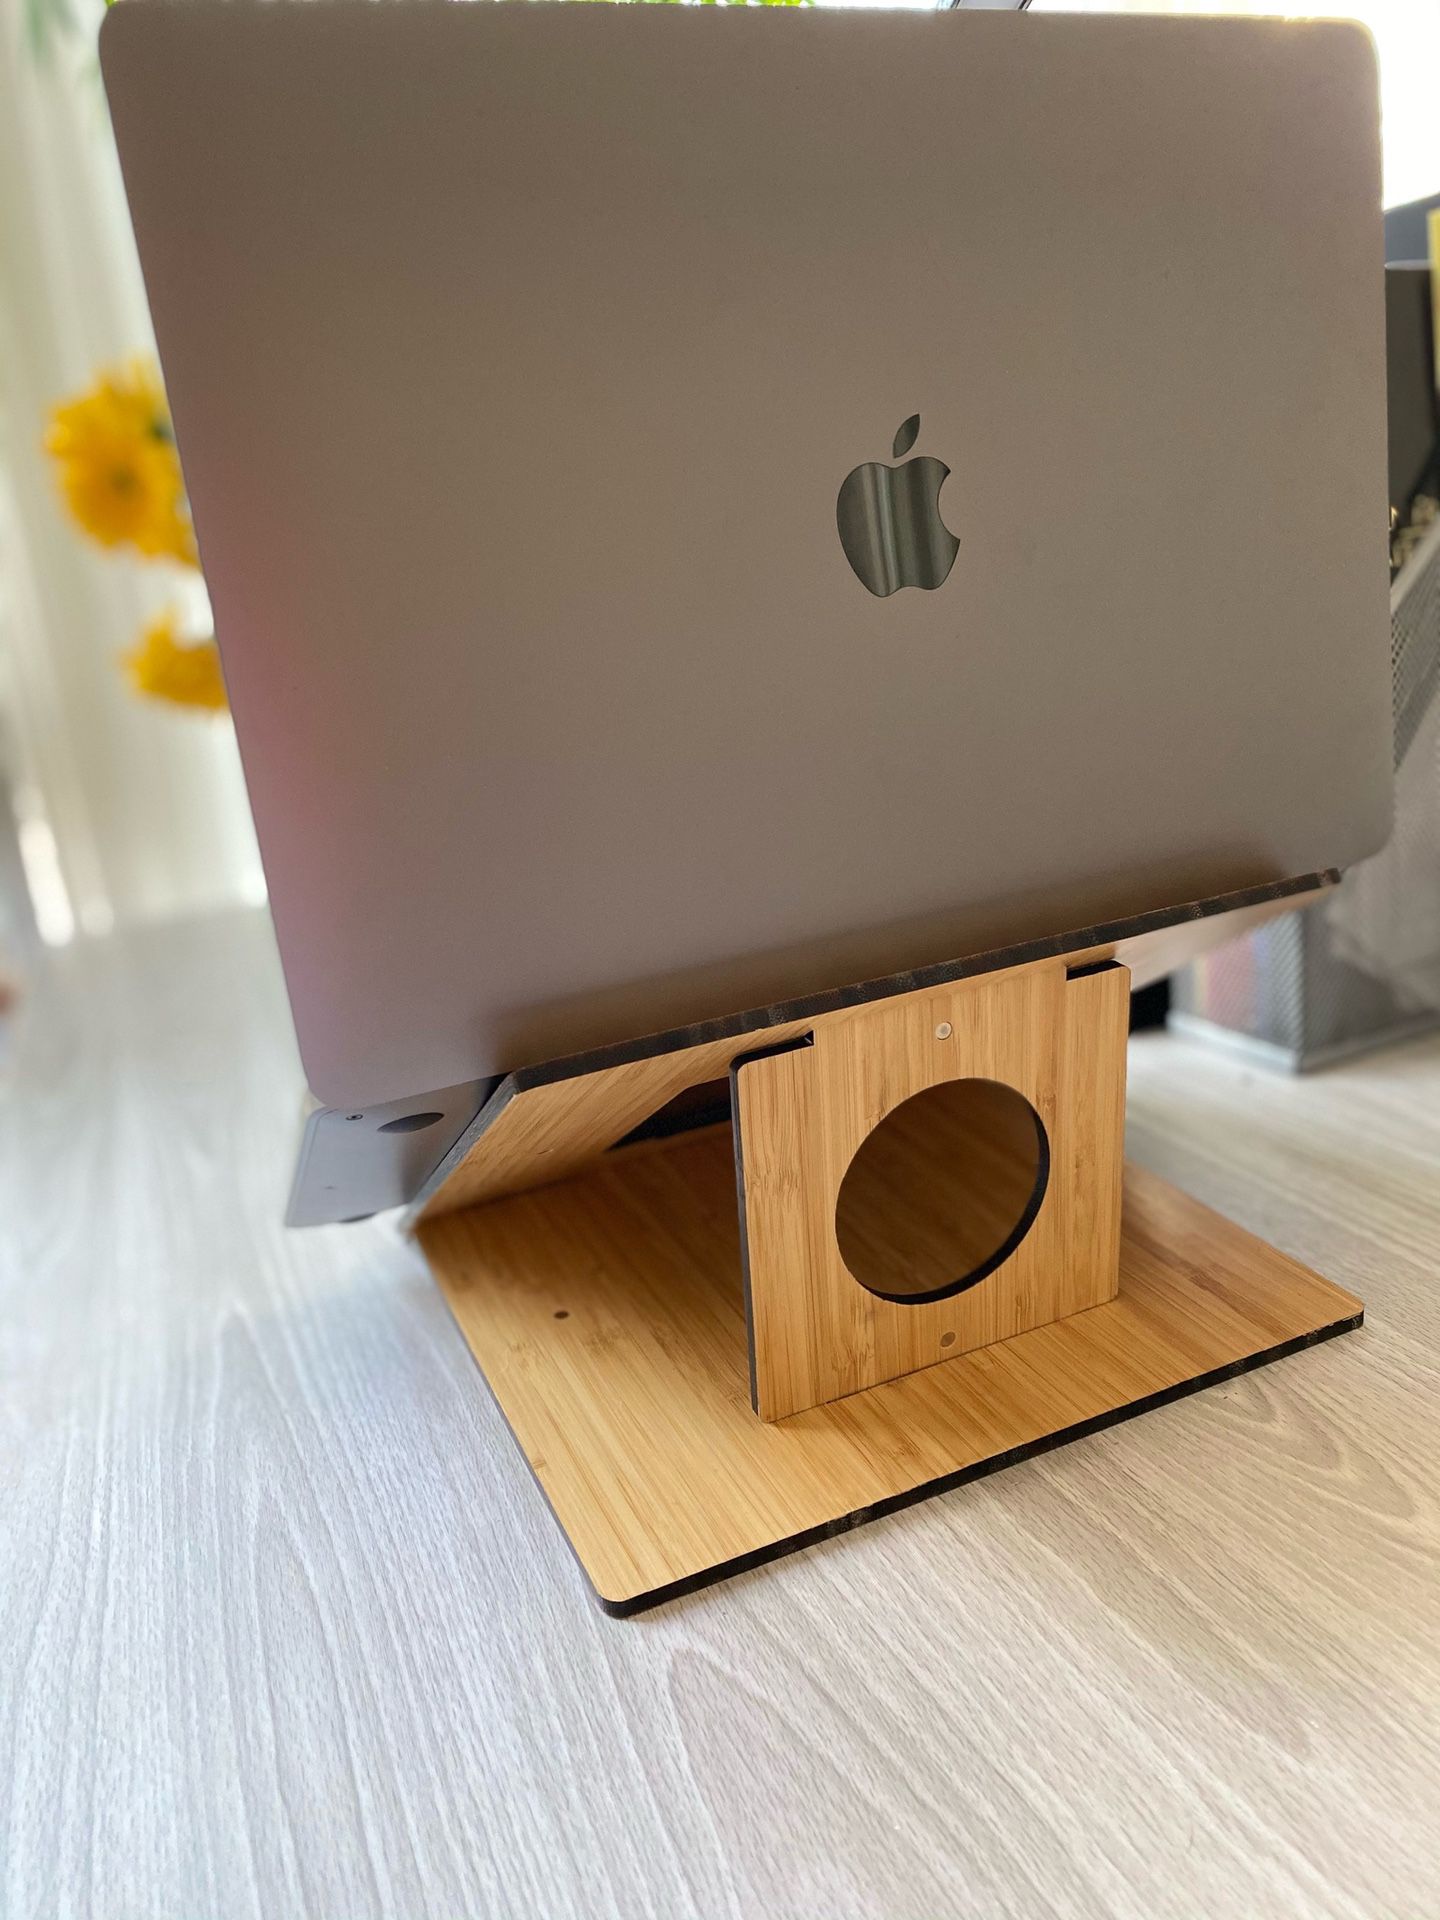 New Portable Laptop & Notebook Stand - Sustainable, Durable, Light & Versatile